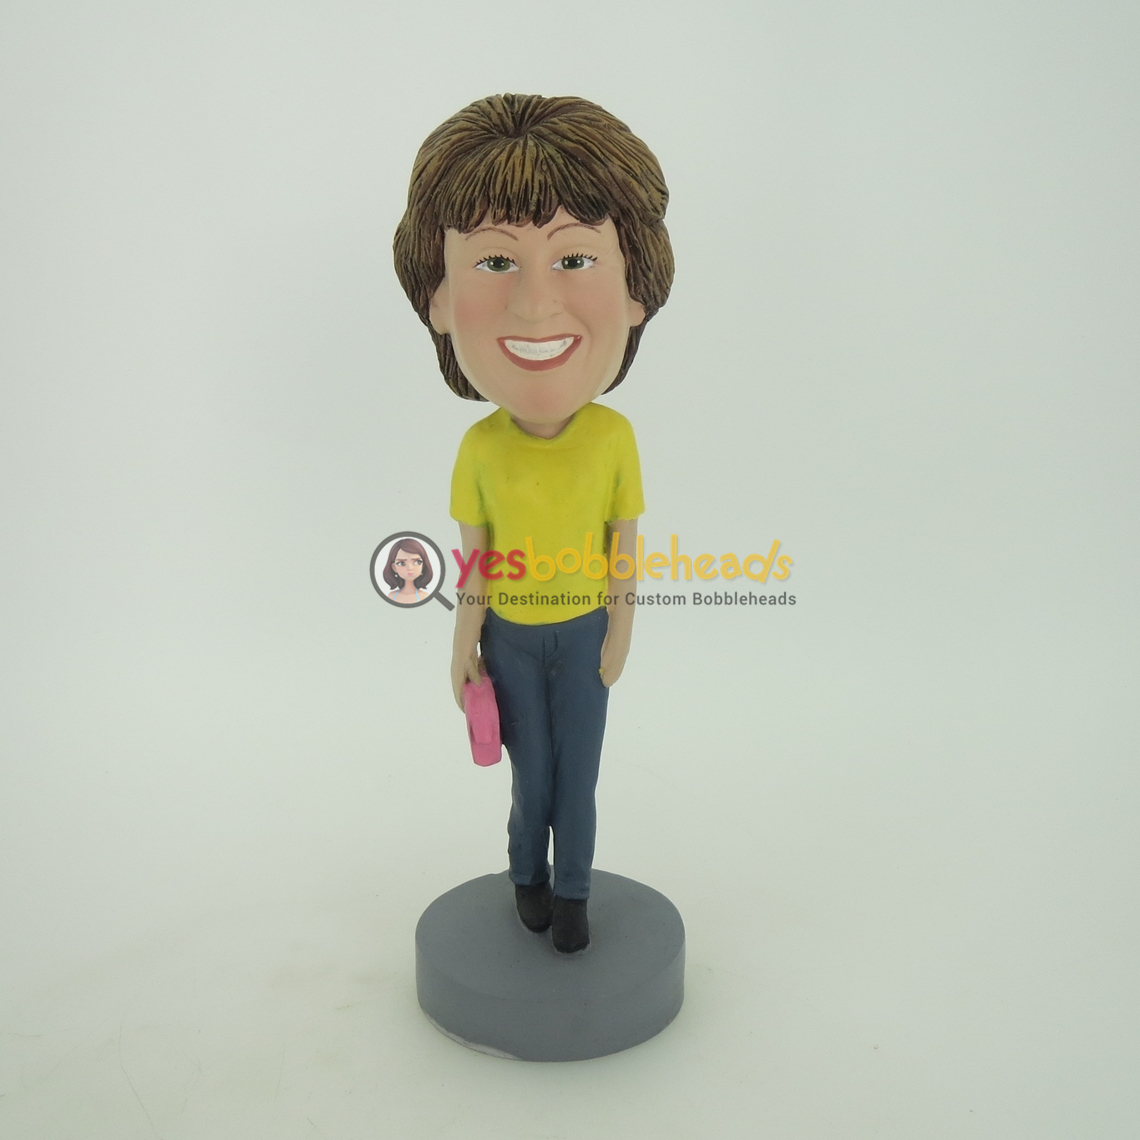 Picture of Custom Bobblehead Doll: Woman with Handbag